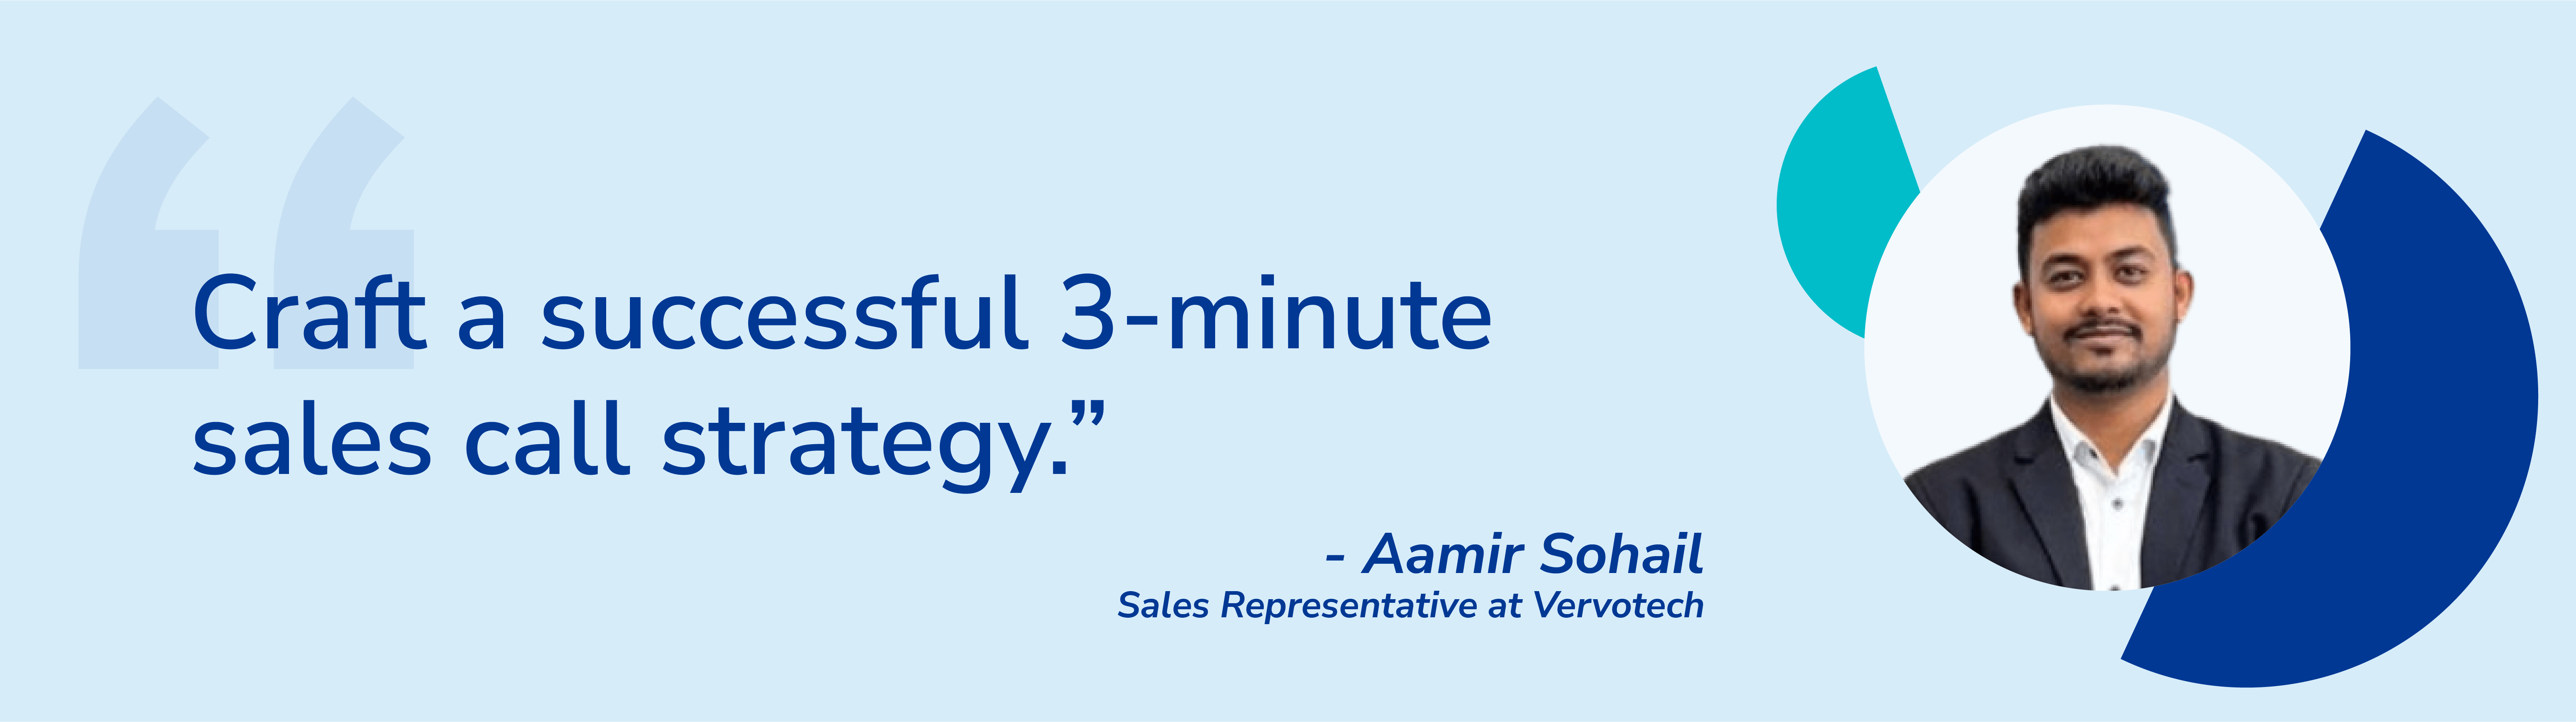 Tips From Top Sales Experts - Aamir Sohail